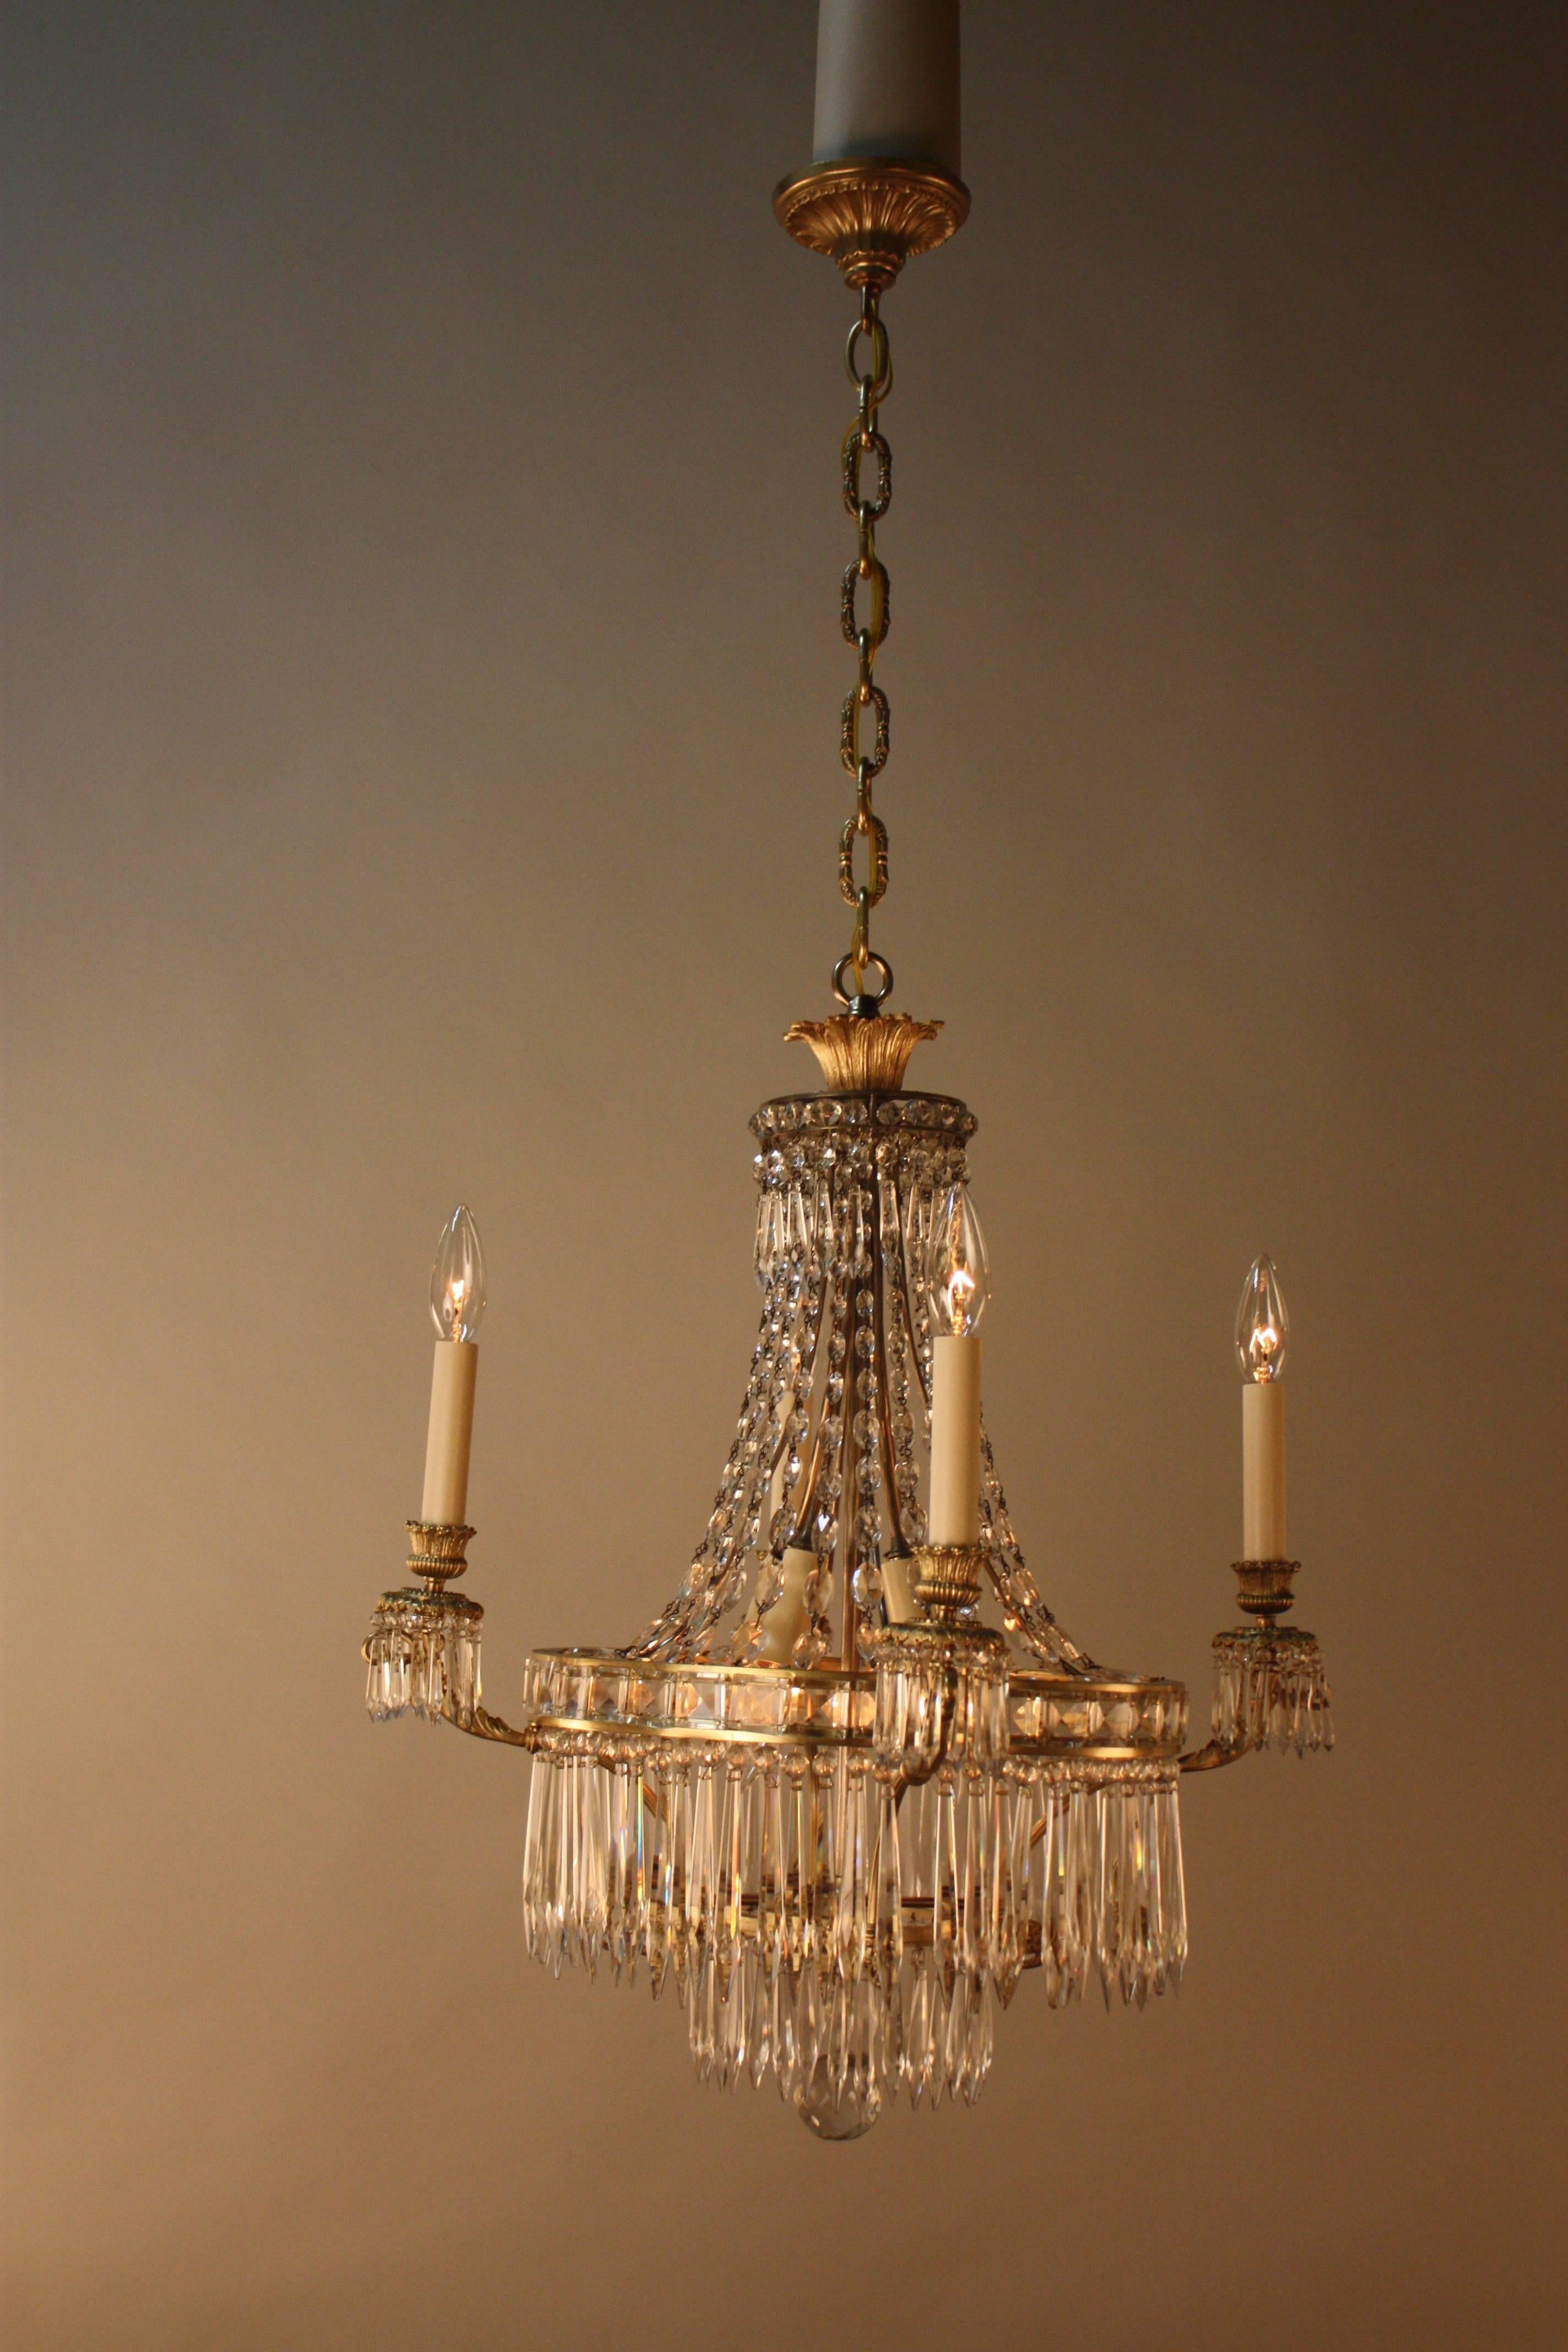 An elegant four-arm and eight-light Classic design crystal and bronze chandelier.
Total height fully installed with one link of chain and canopy is 30